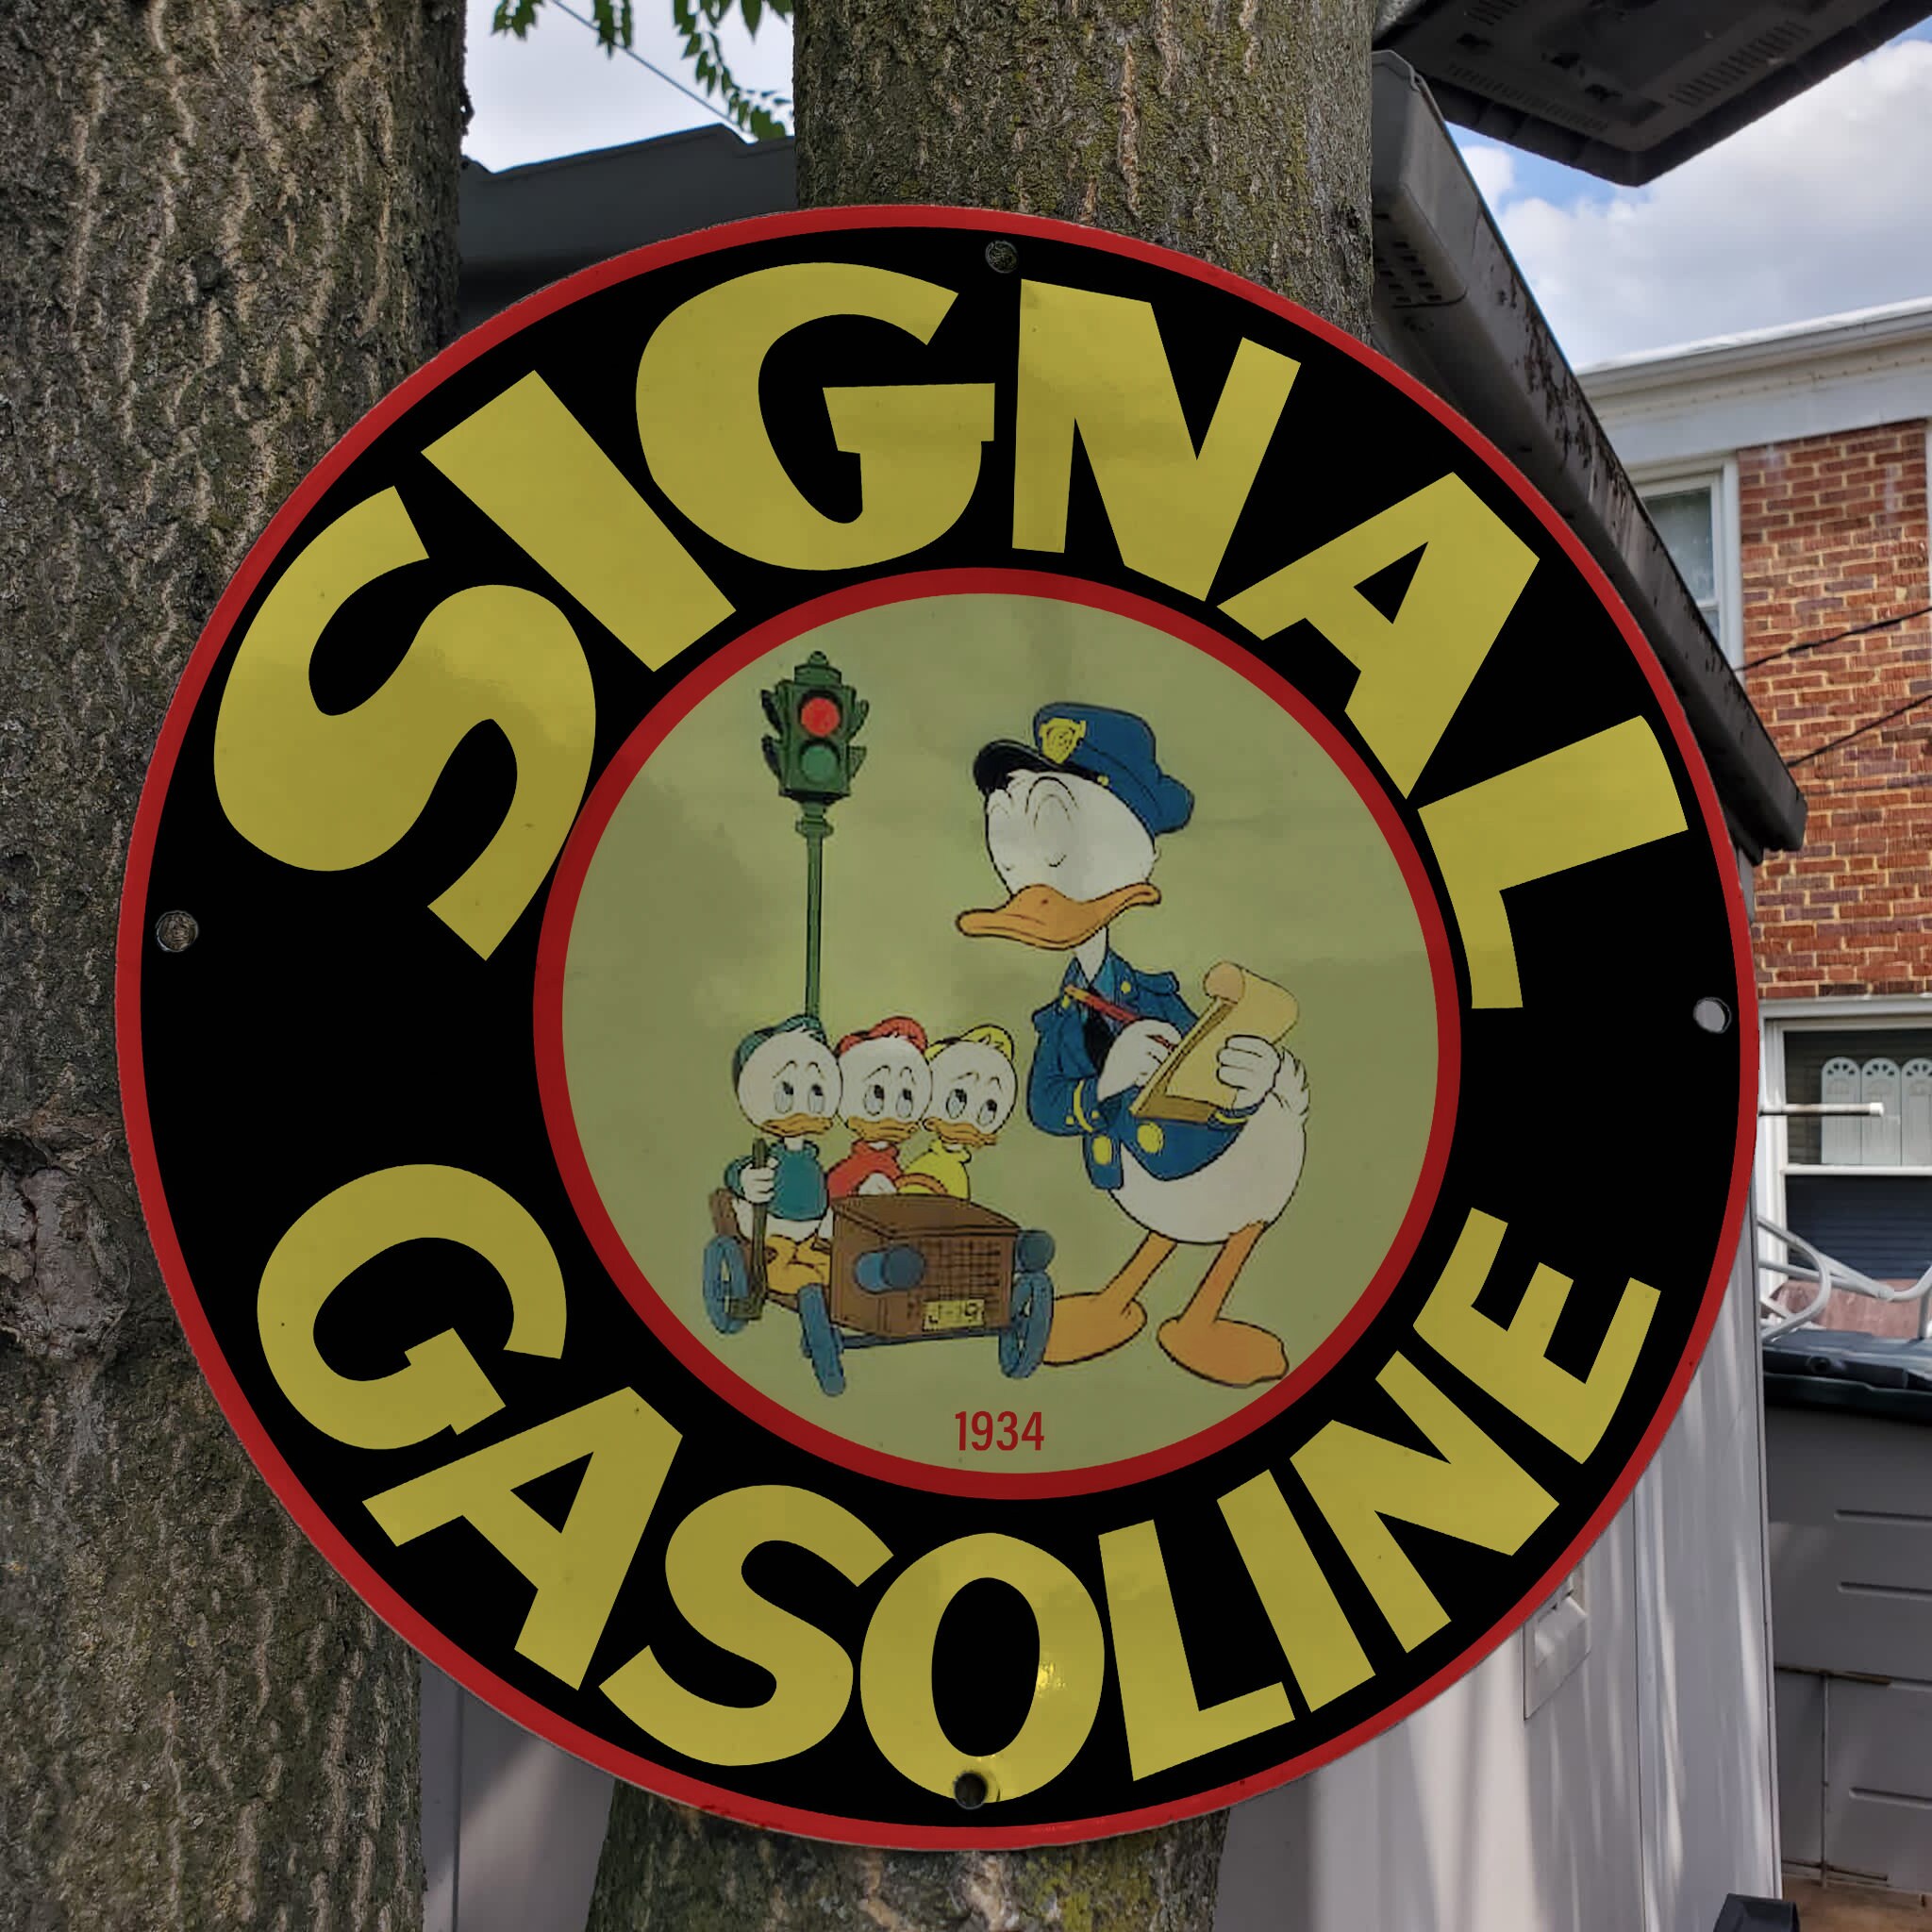 Custom Blended Pump Pic 1963 Sunoco Gasoline New Metal Sign Free Shipping 